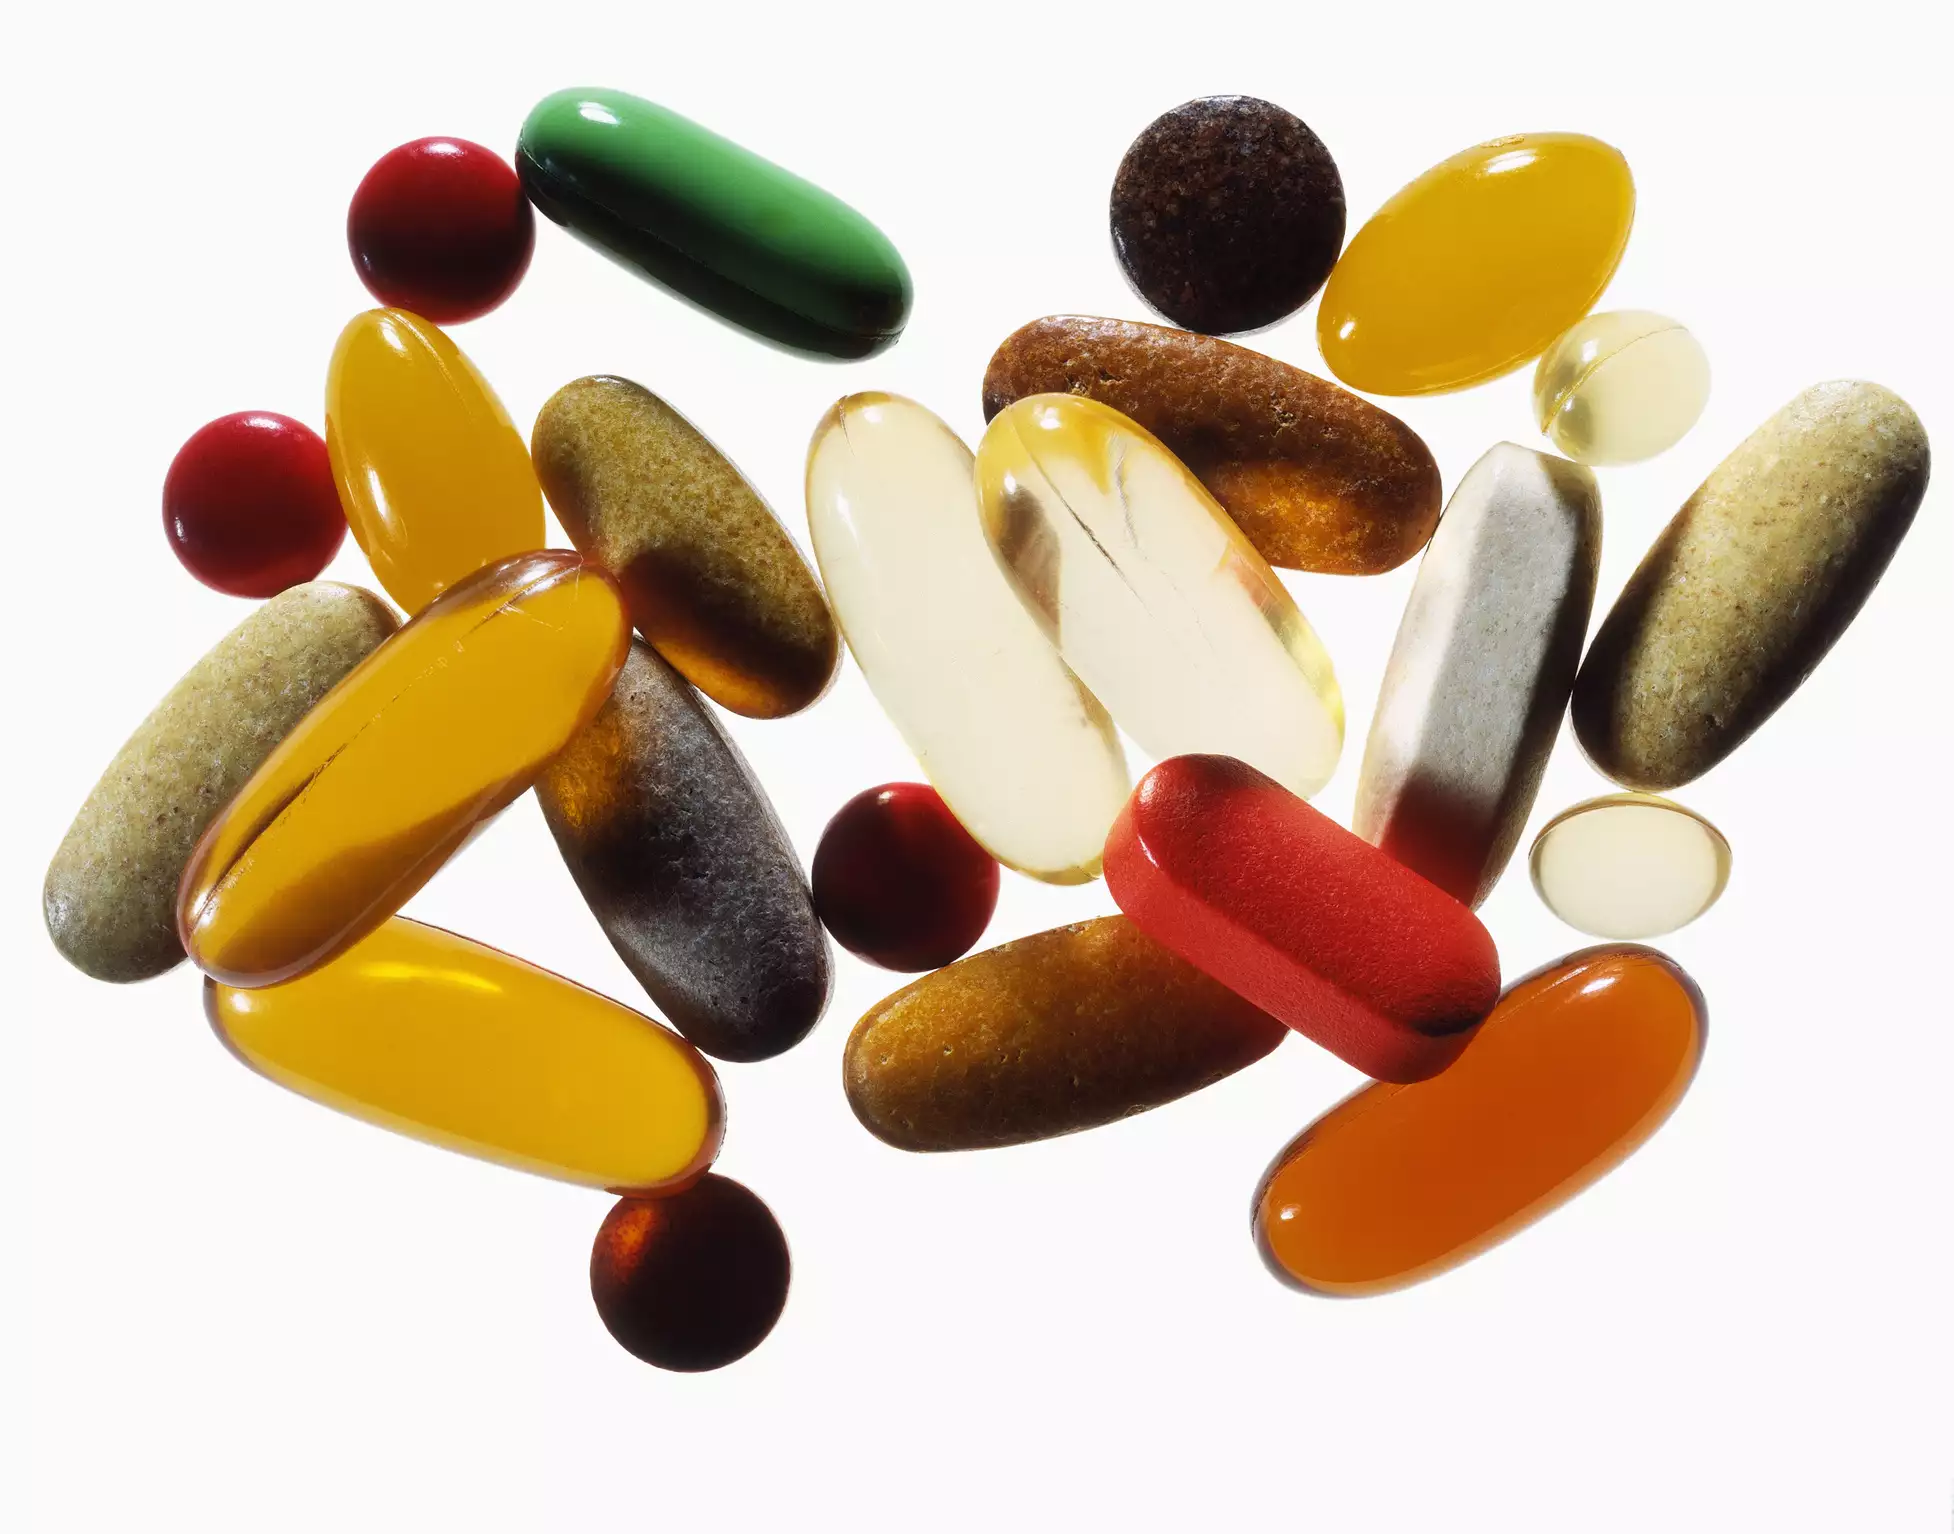 assorted vitamins on white background